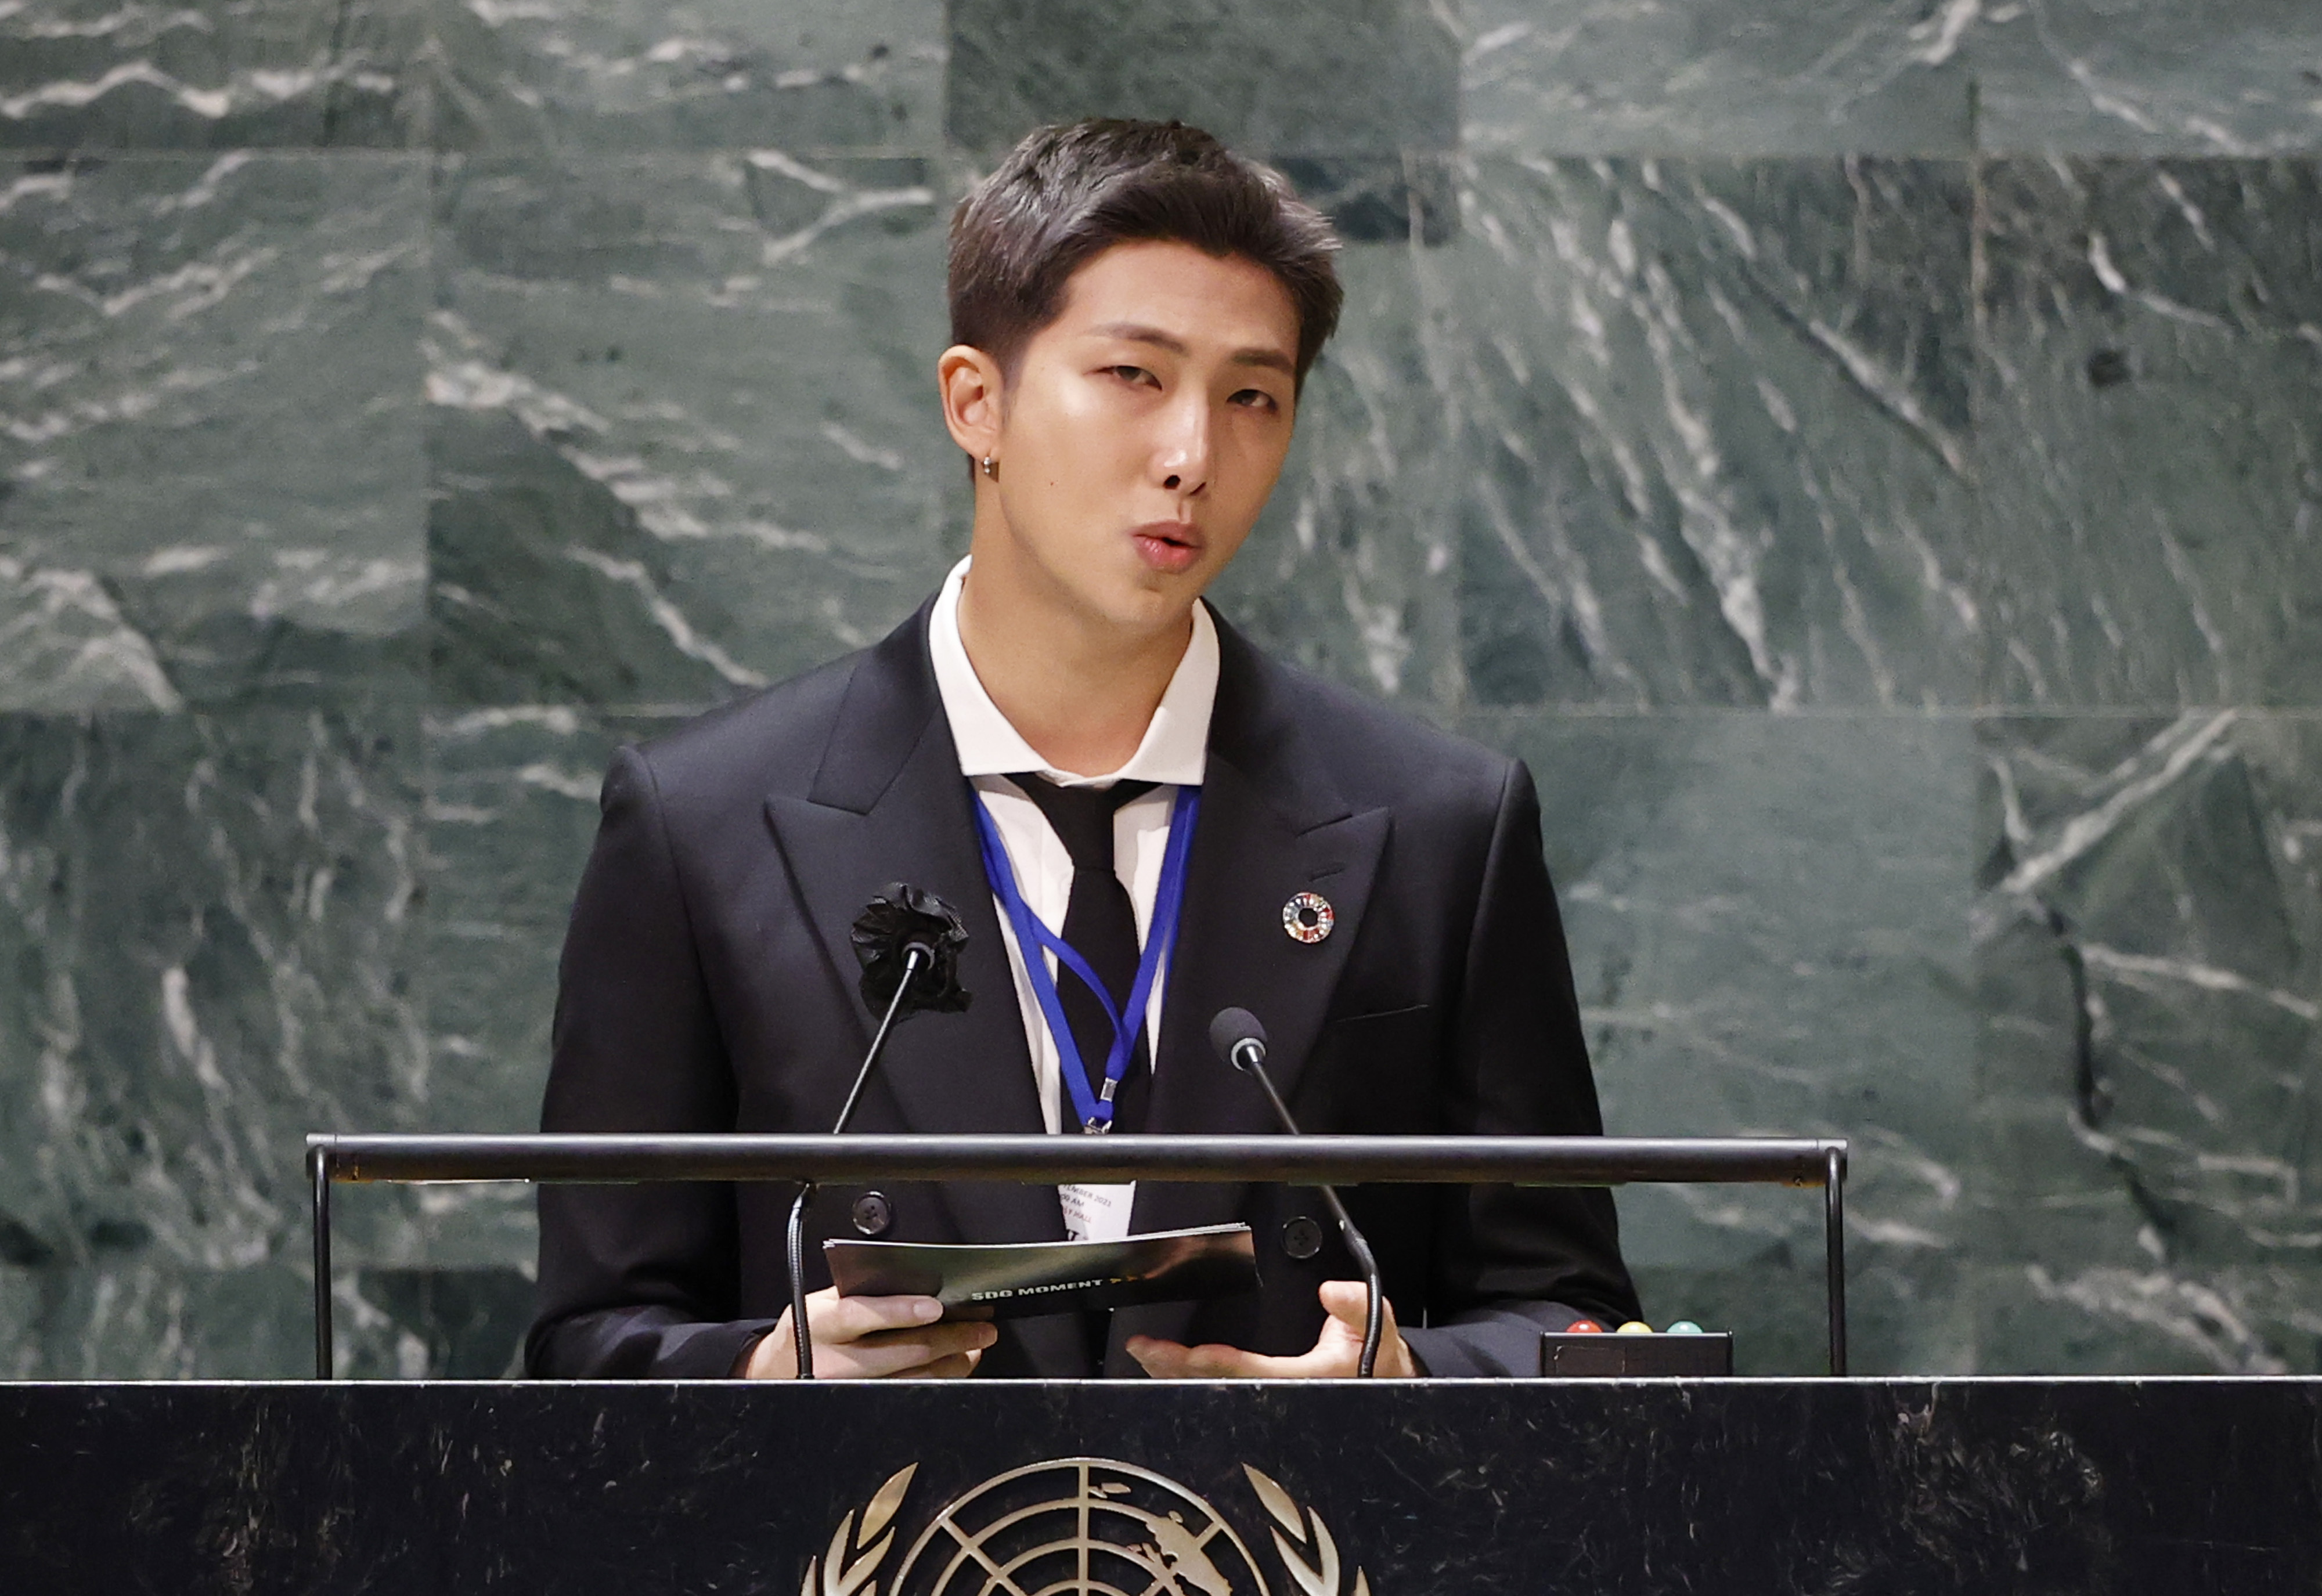 BTS speaks at the United Nations on the environment and our future